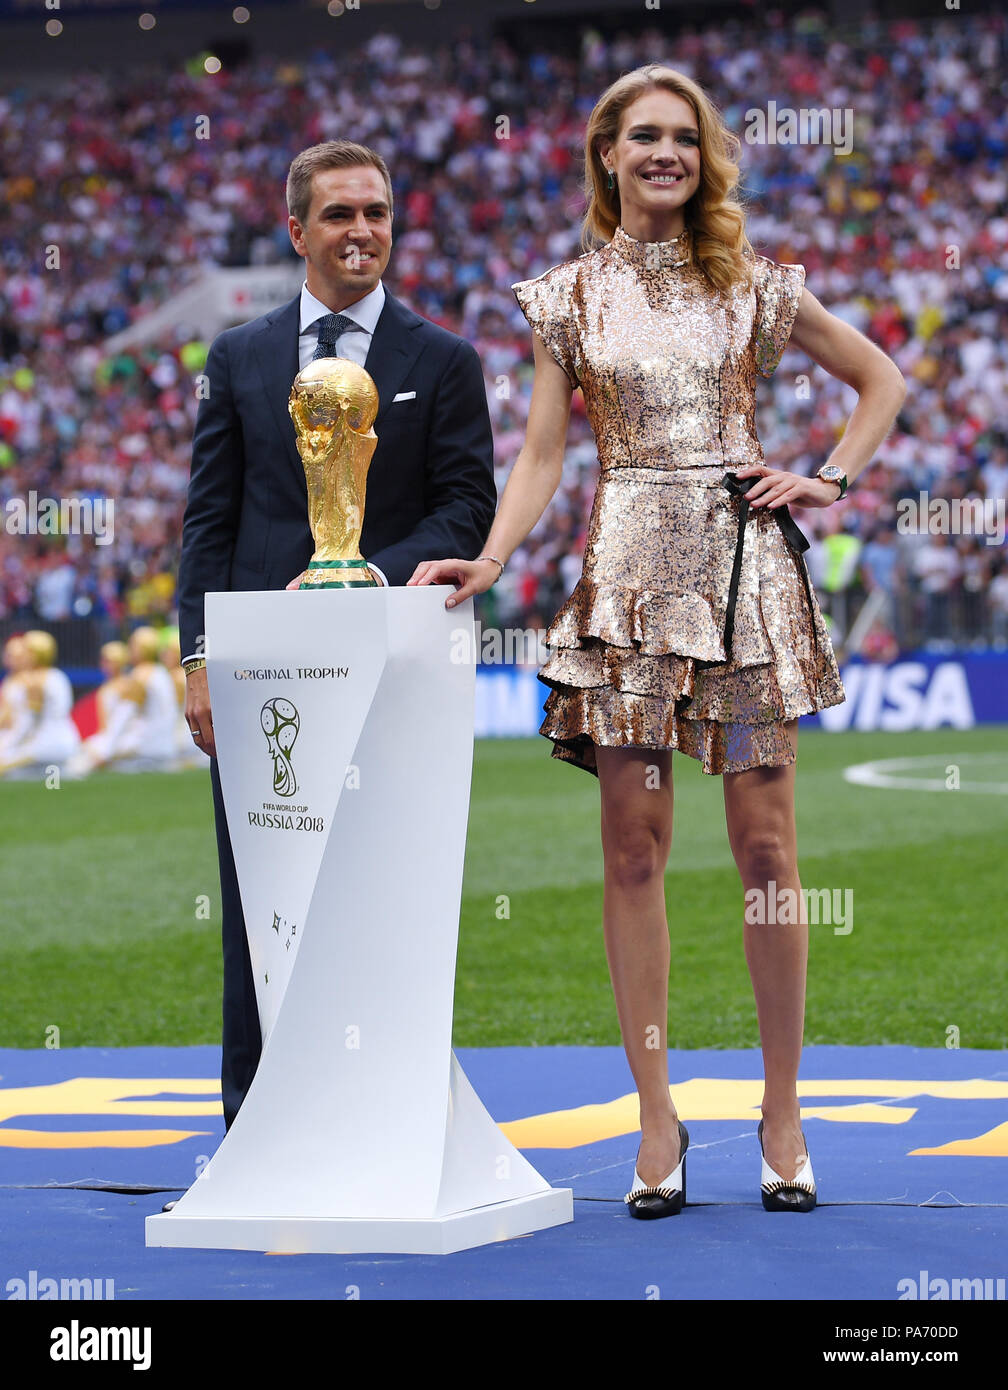 Moscow, Russland. 15th July, 2018. Philipp Lahm (World Champion 2014  Germany) presents the World Cup trophy with Natalia Vodianova (r).  GES/Football/World Championship 2018 Russia, Final: France - Croatia,  15.07.2018 GES/Soccer/Football, Worldcup 2